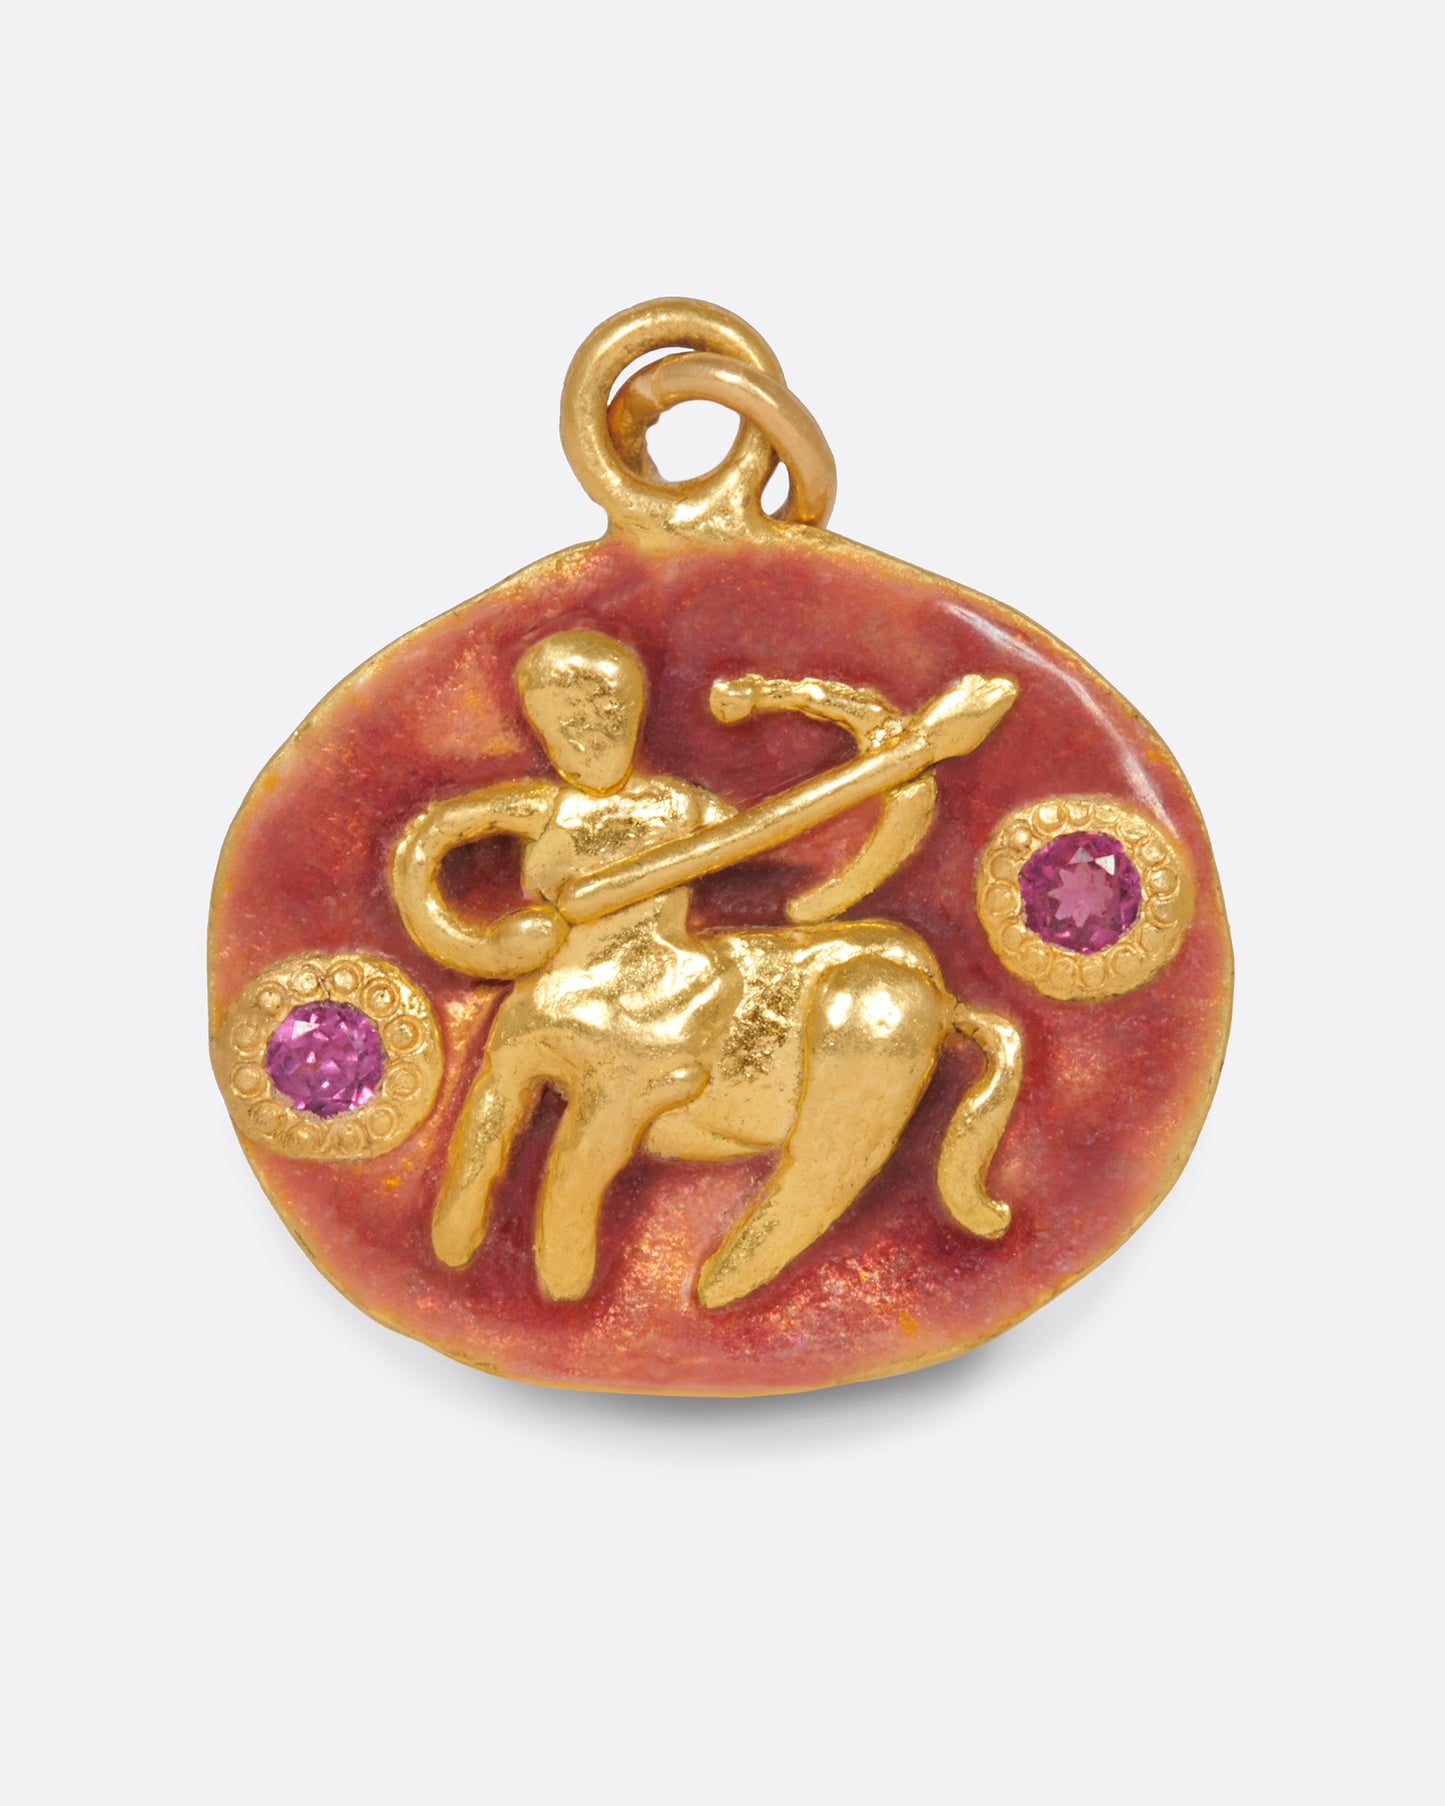 An oval gold pendant with rosy pink enamel and a hand-sculpted Sagittarius icon.